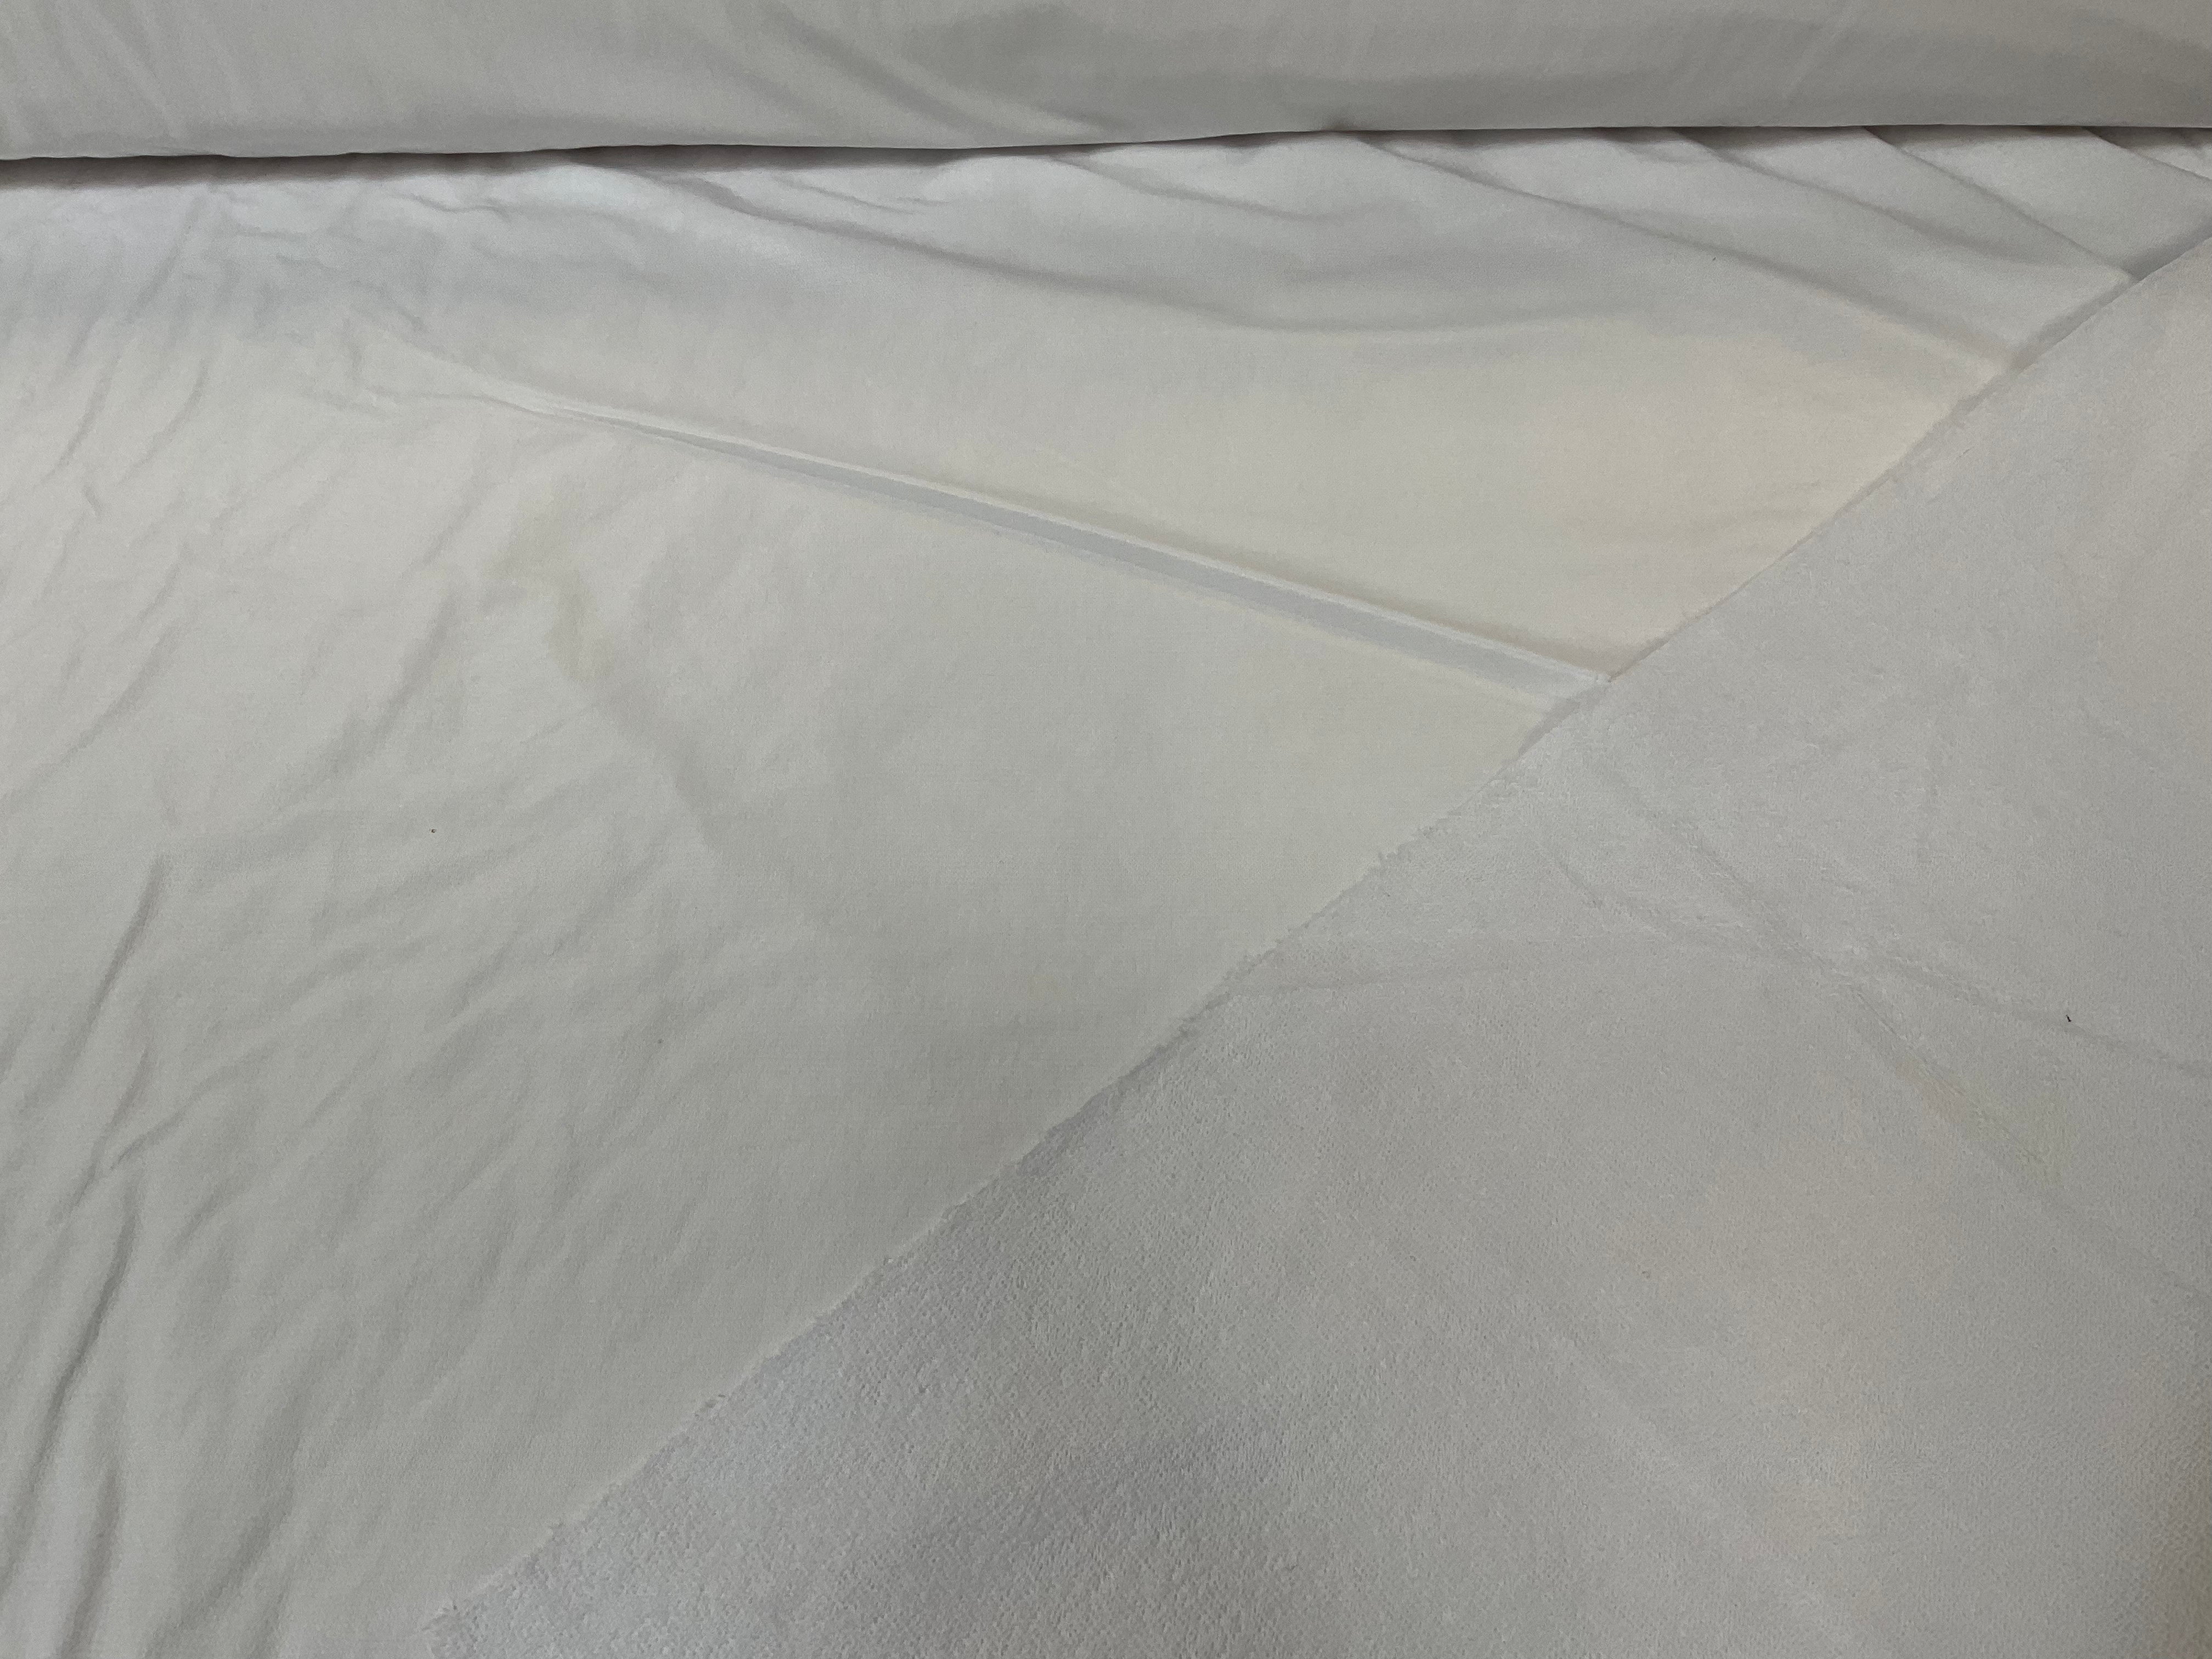 Pu Backed Cotton Towelling Fabric